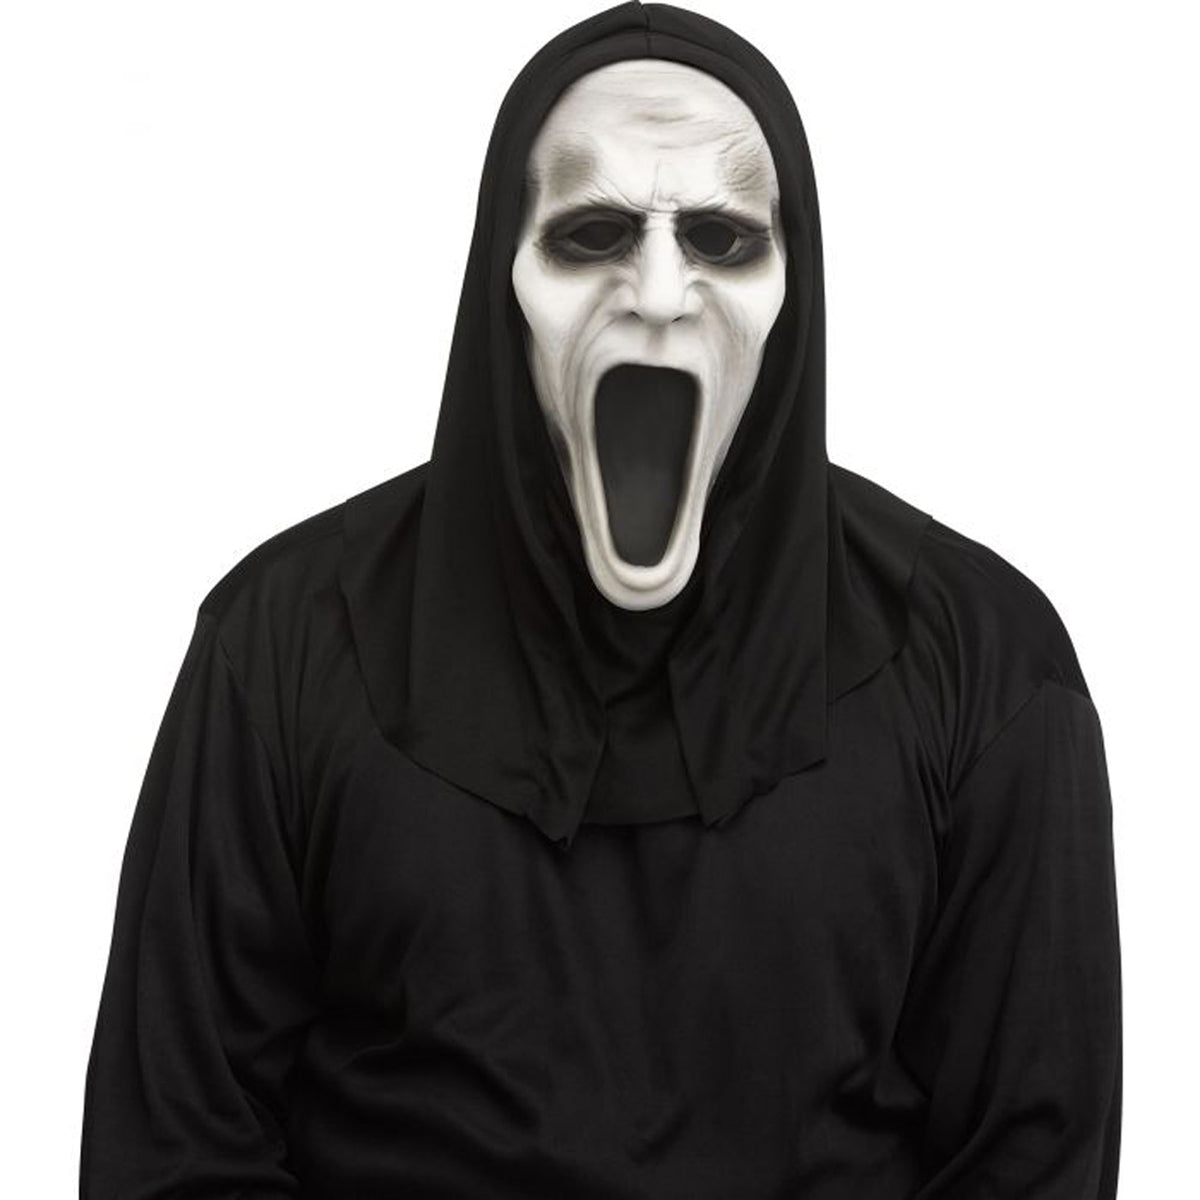 FUN WORLD Costume Accessories Silent Screamer Mask with Hood for Adults 071765143936